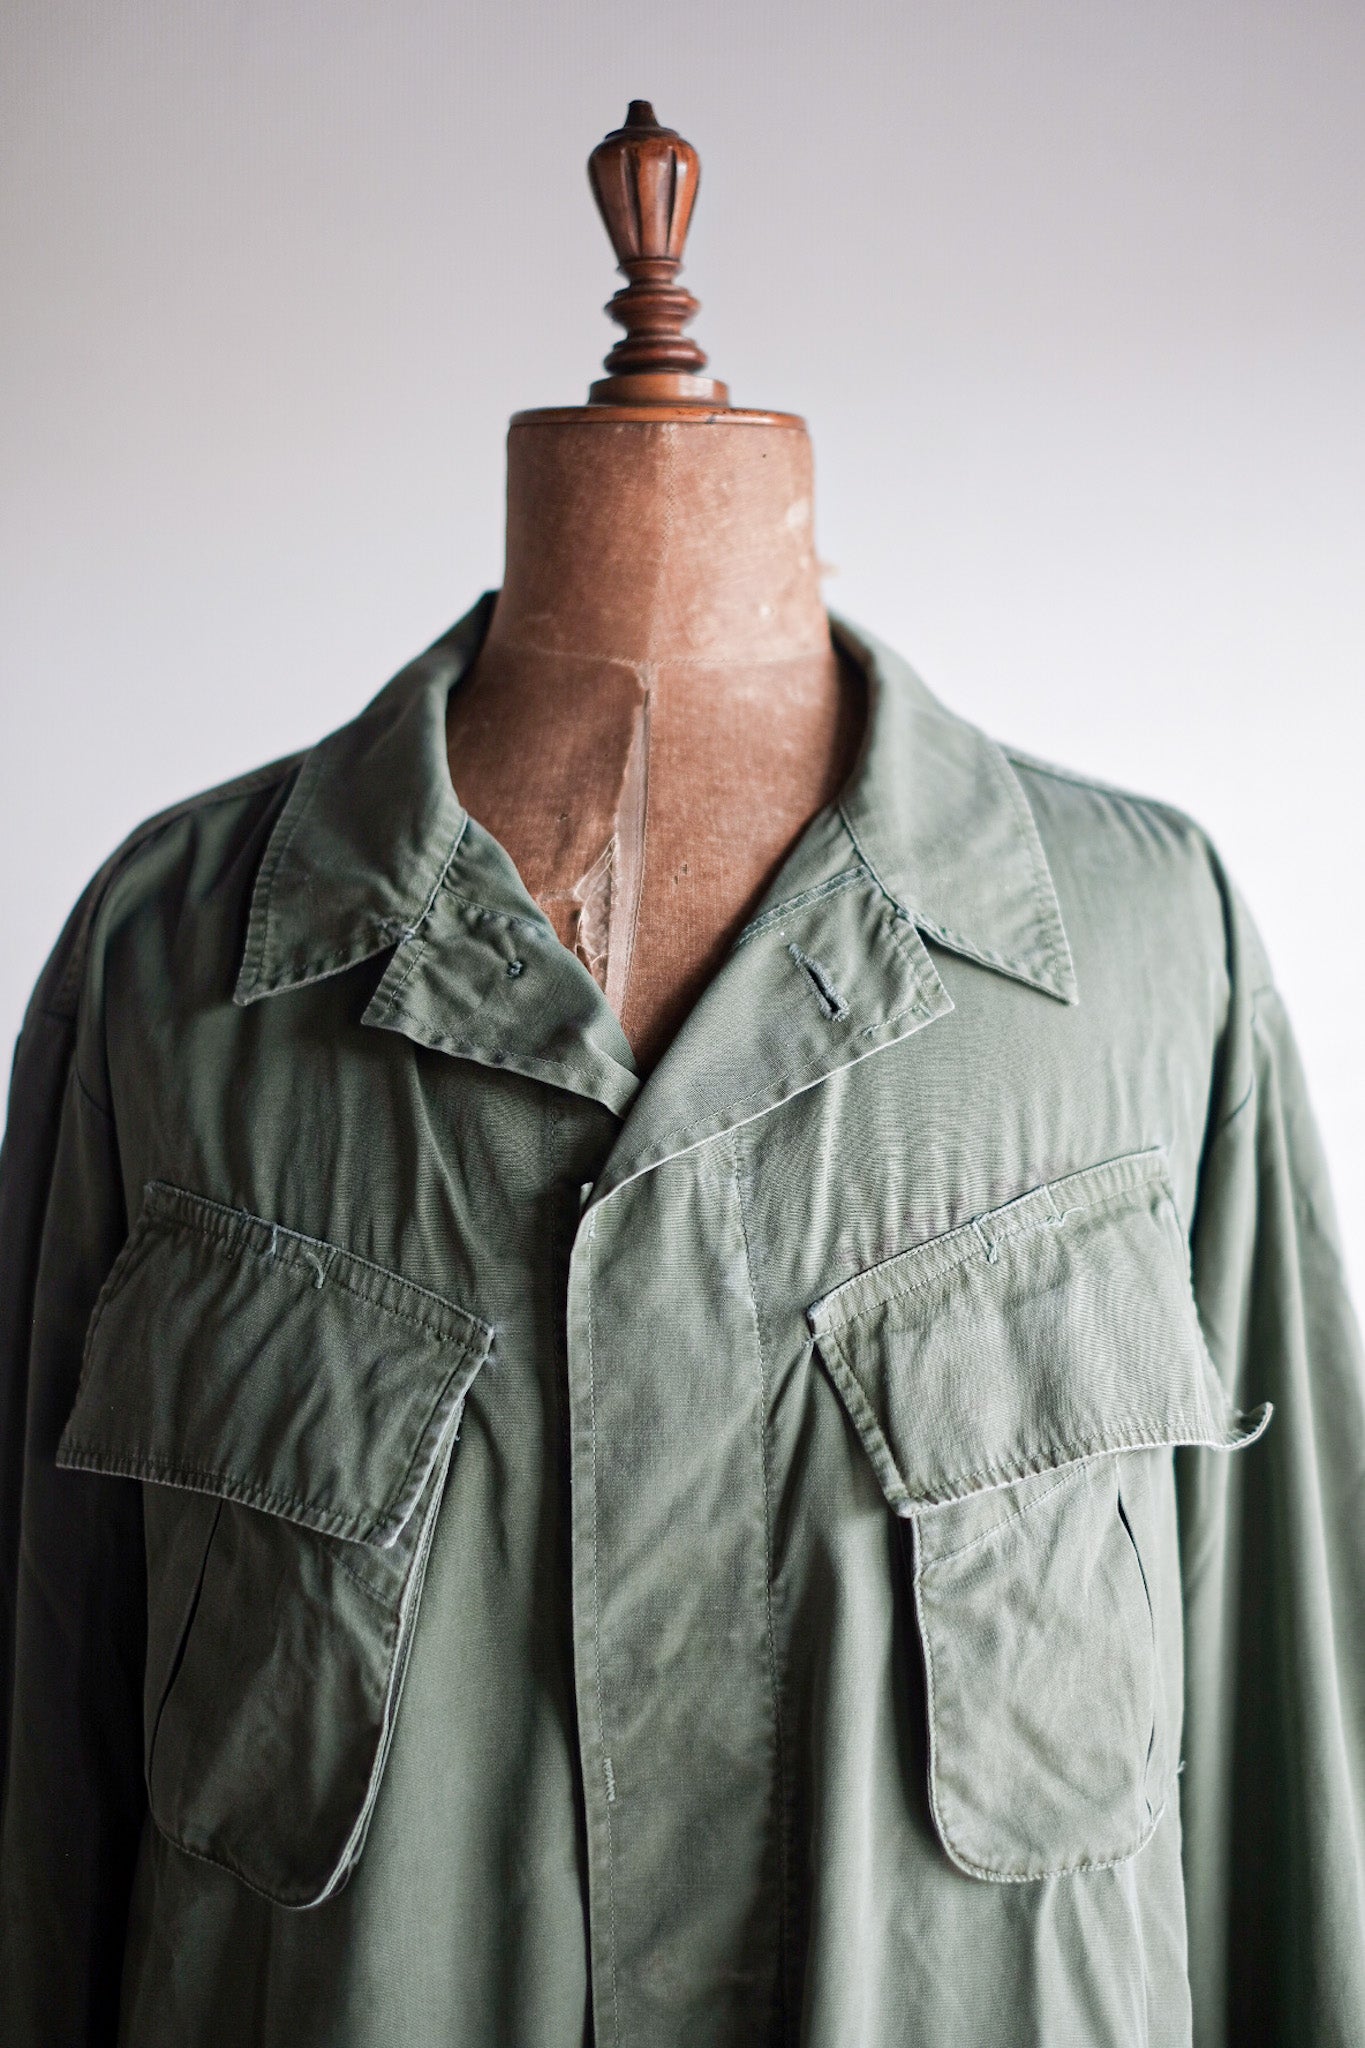 【~60's】US Army Jungle Fatigue Jacket "3rd Type" Size.LARGE-REGULAR